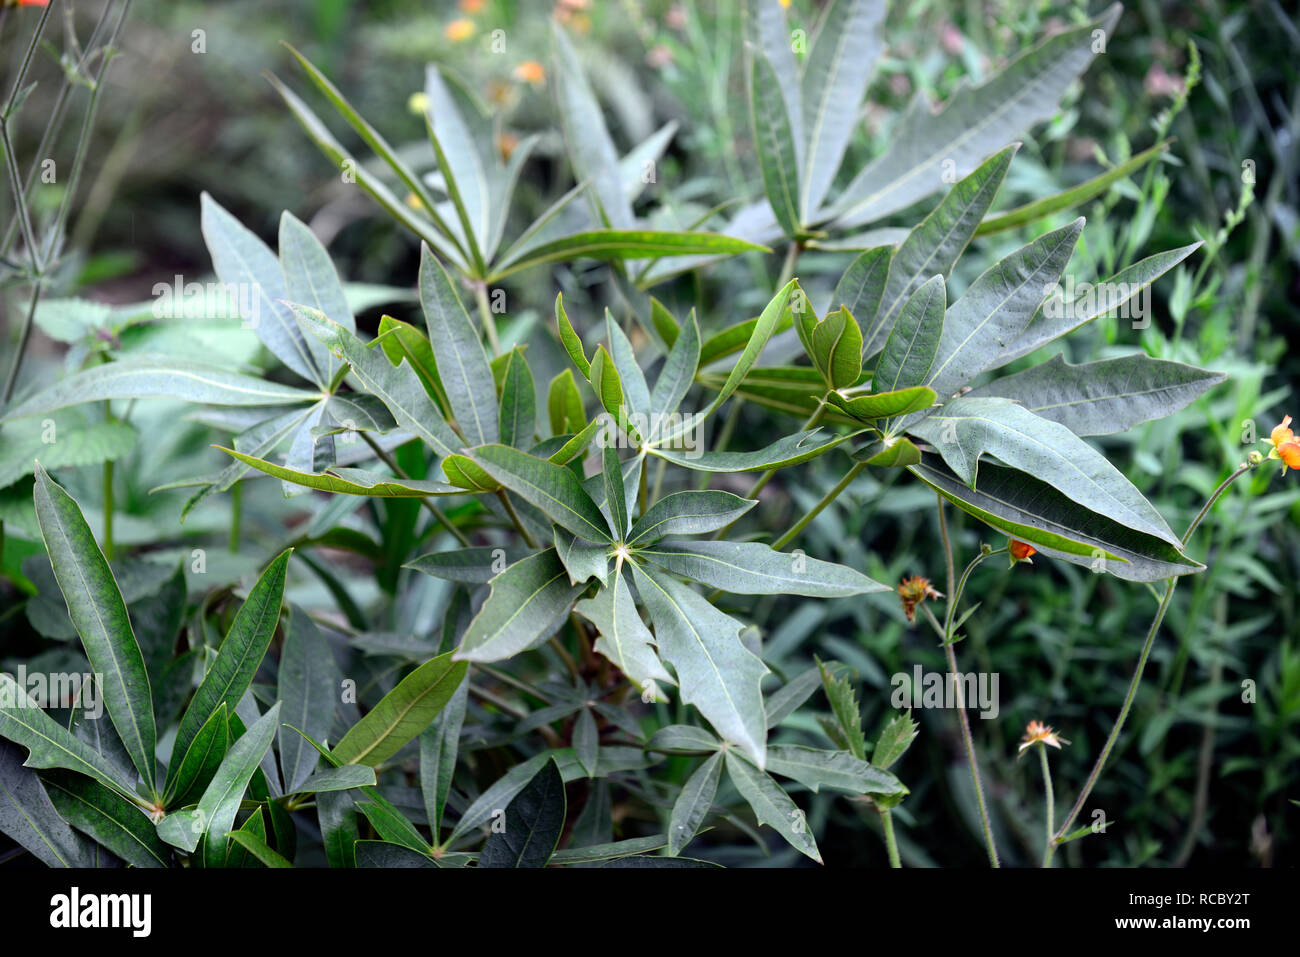 Oreopanax incisus,Araliaceae,green leaves,foliage,architectural plant,exotic,tropical planting,RM Floral Stock Photo